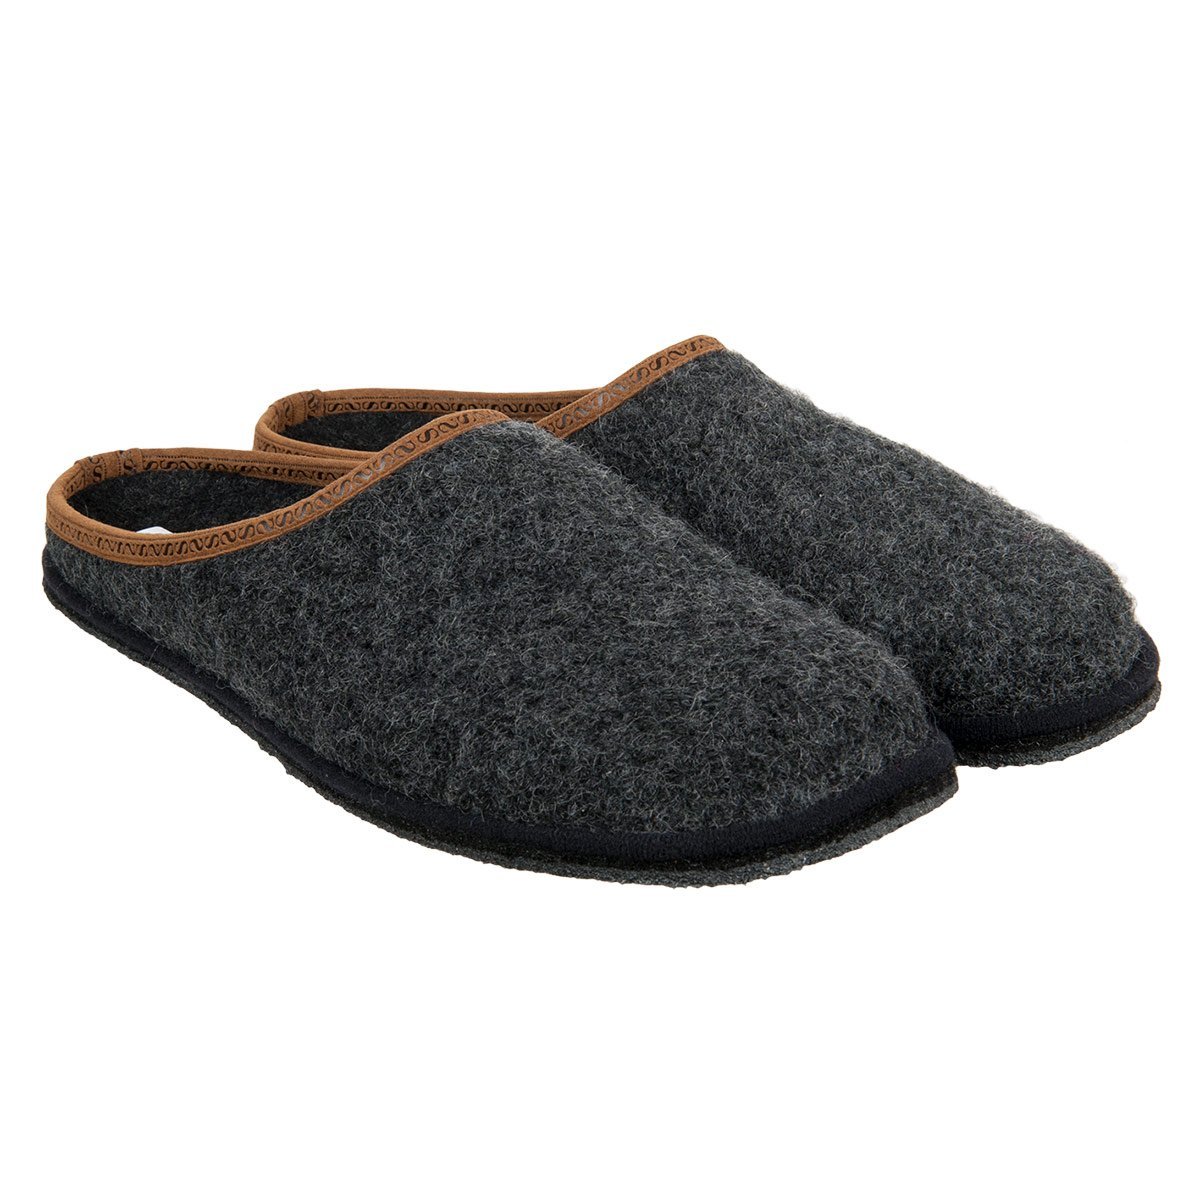 STEGMANN slippers for man with non slip sole in wool